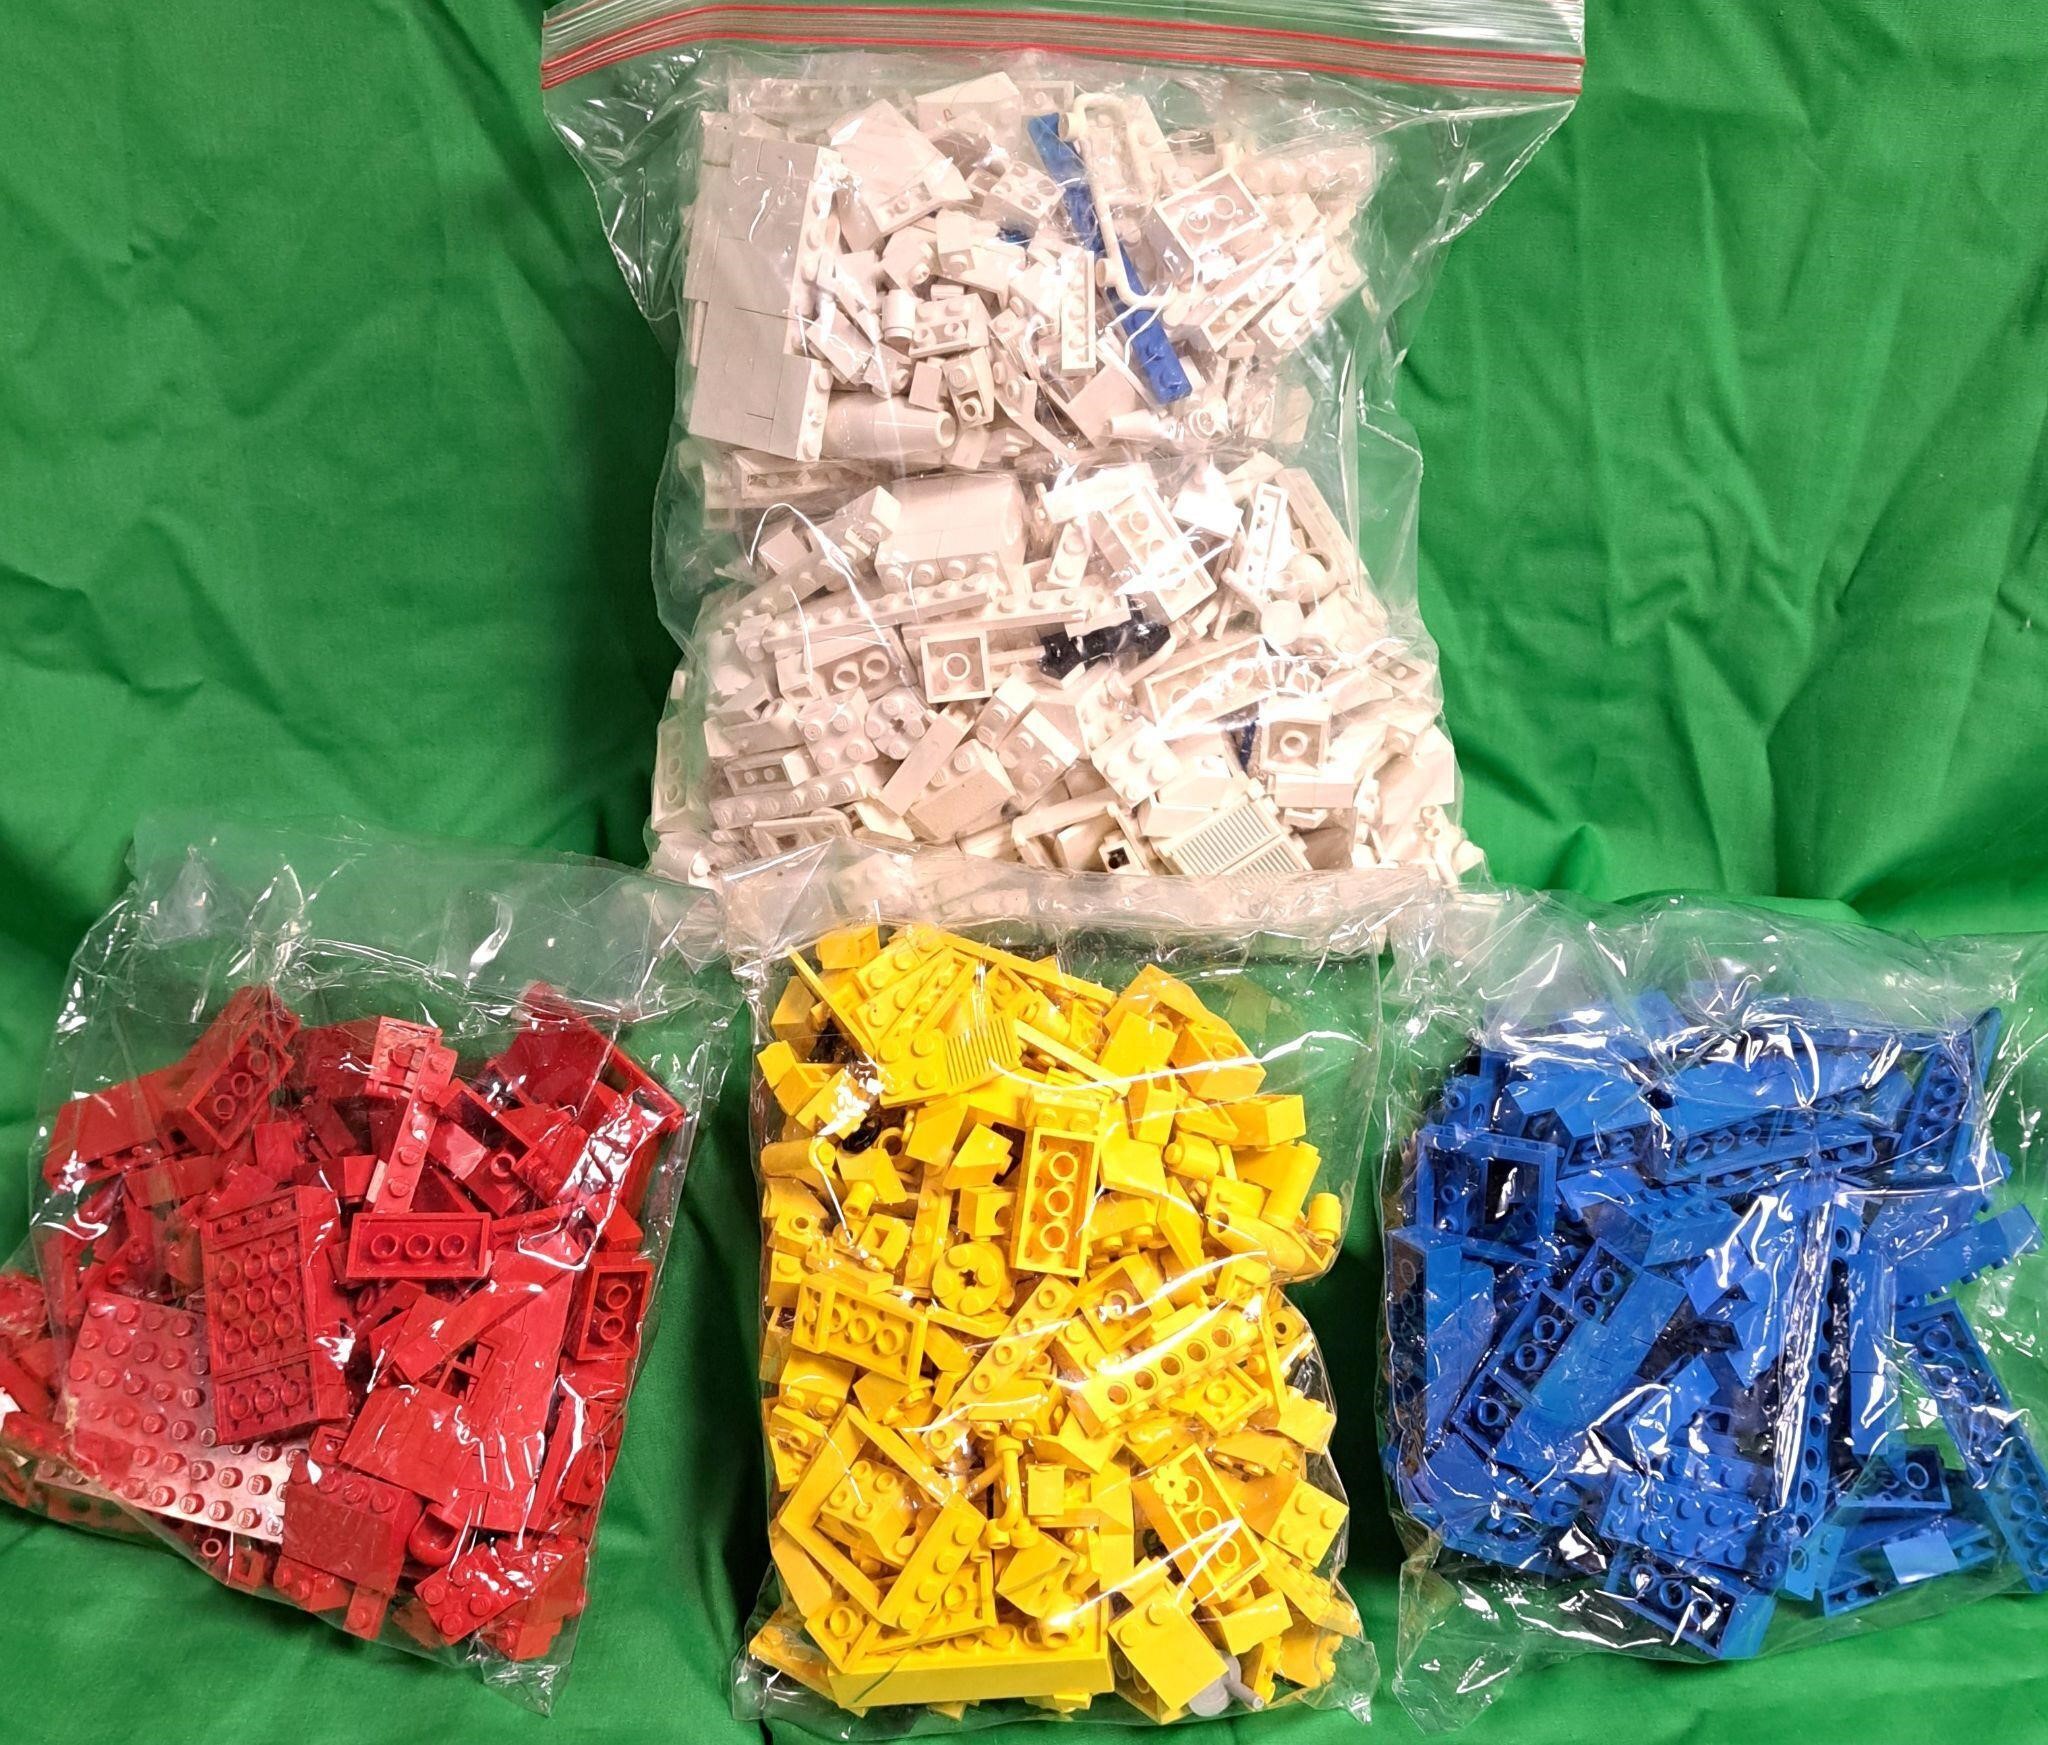 4 LARGE BAGS ASSORTED LEGO BLOCKS PIECES PARTS